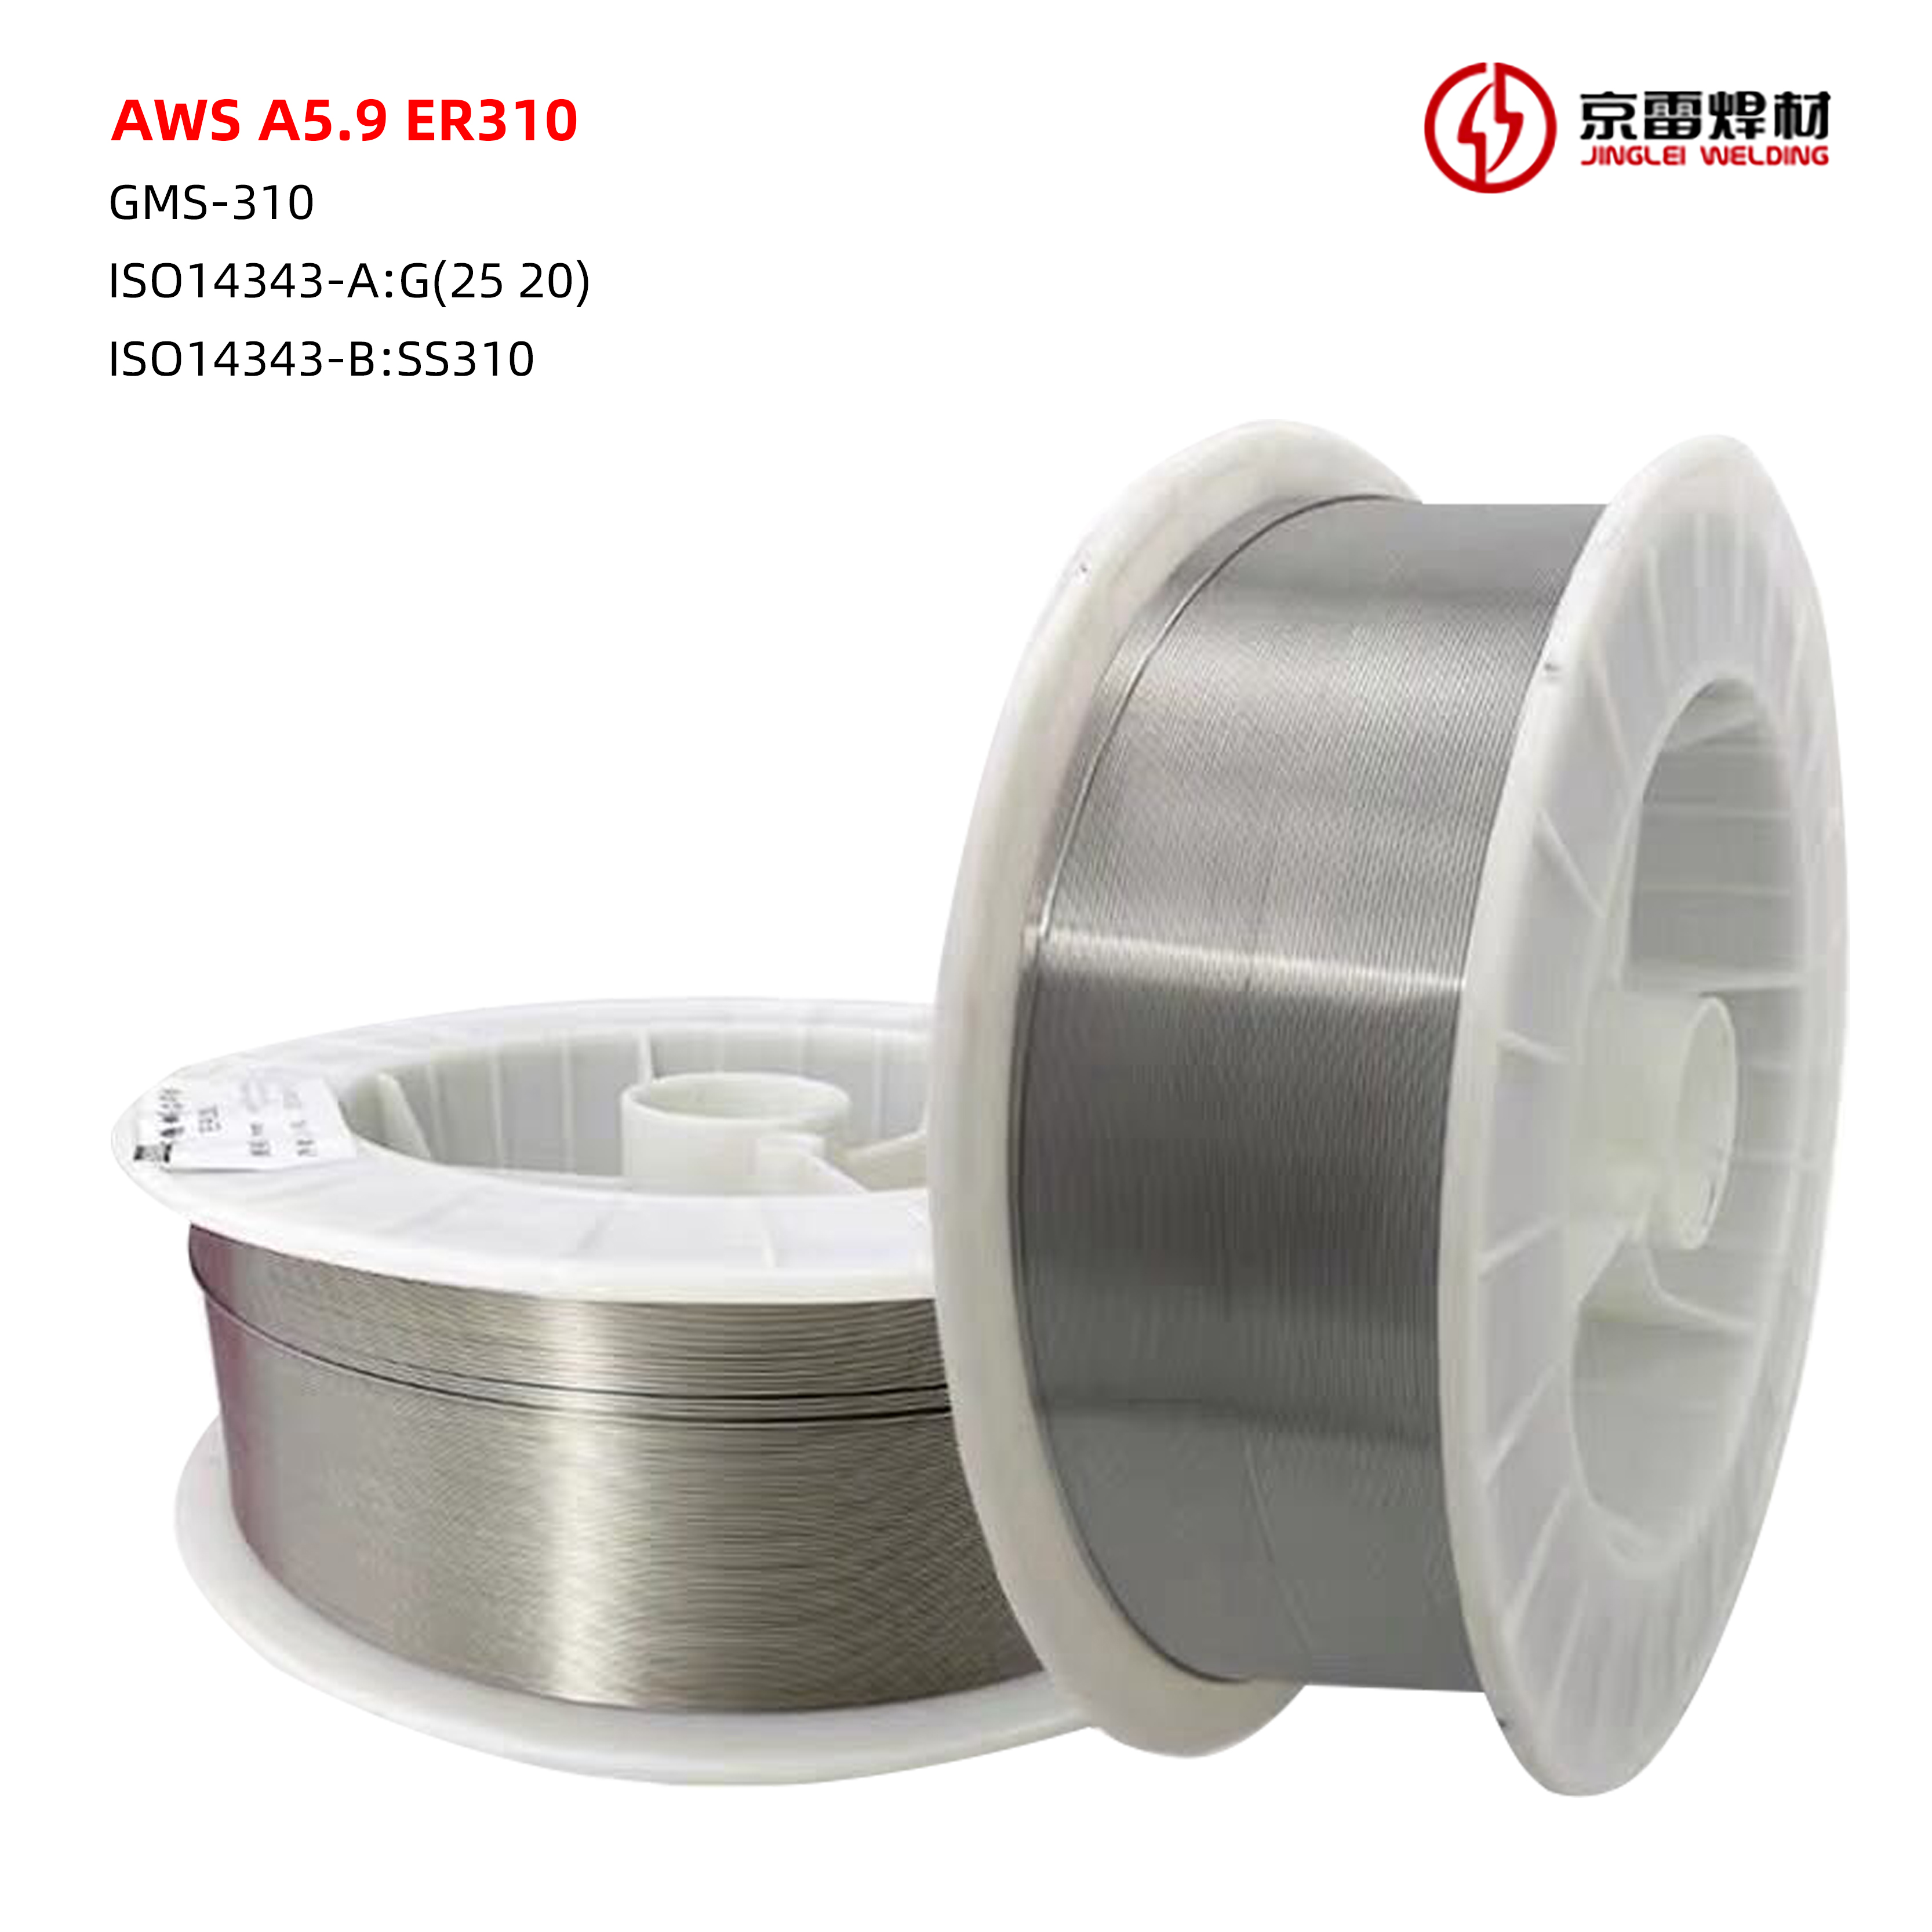 MIG Welding Wire For Stainless Steel ER310 GDS-2209/GXS-E330 pipe plate cladding site welding goods